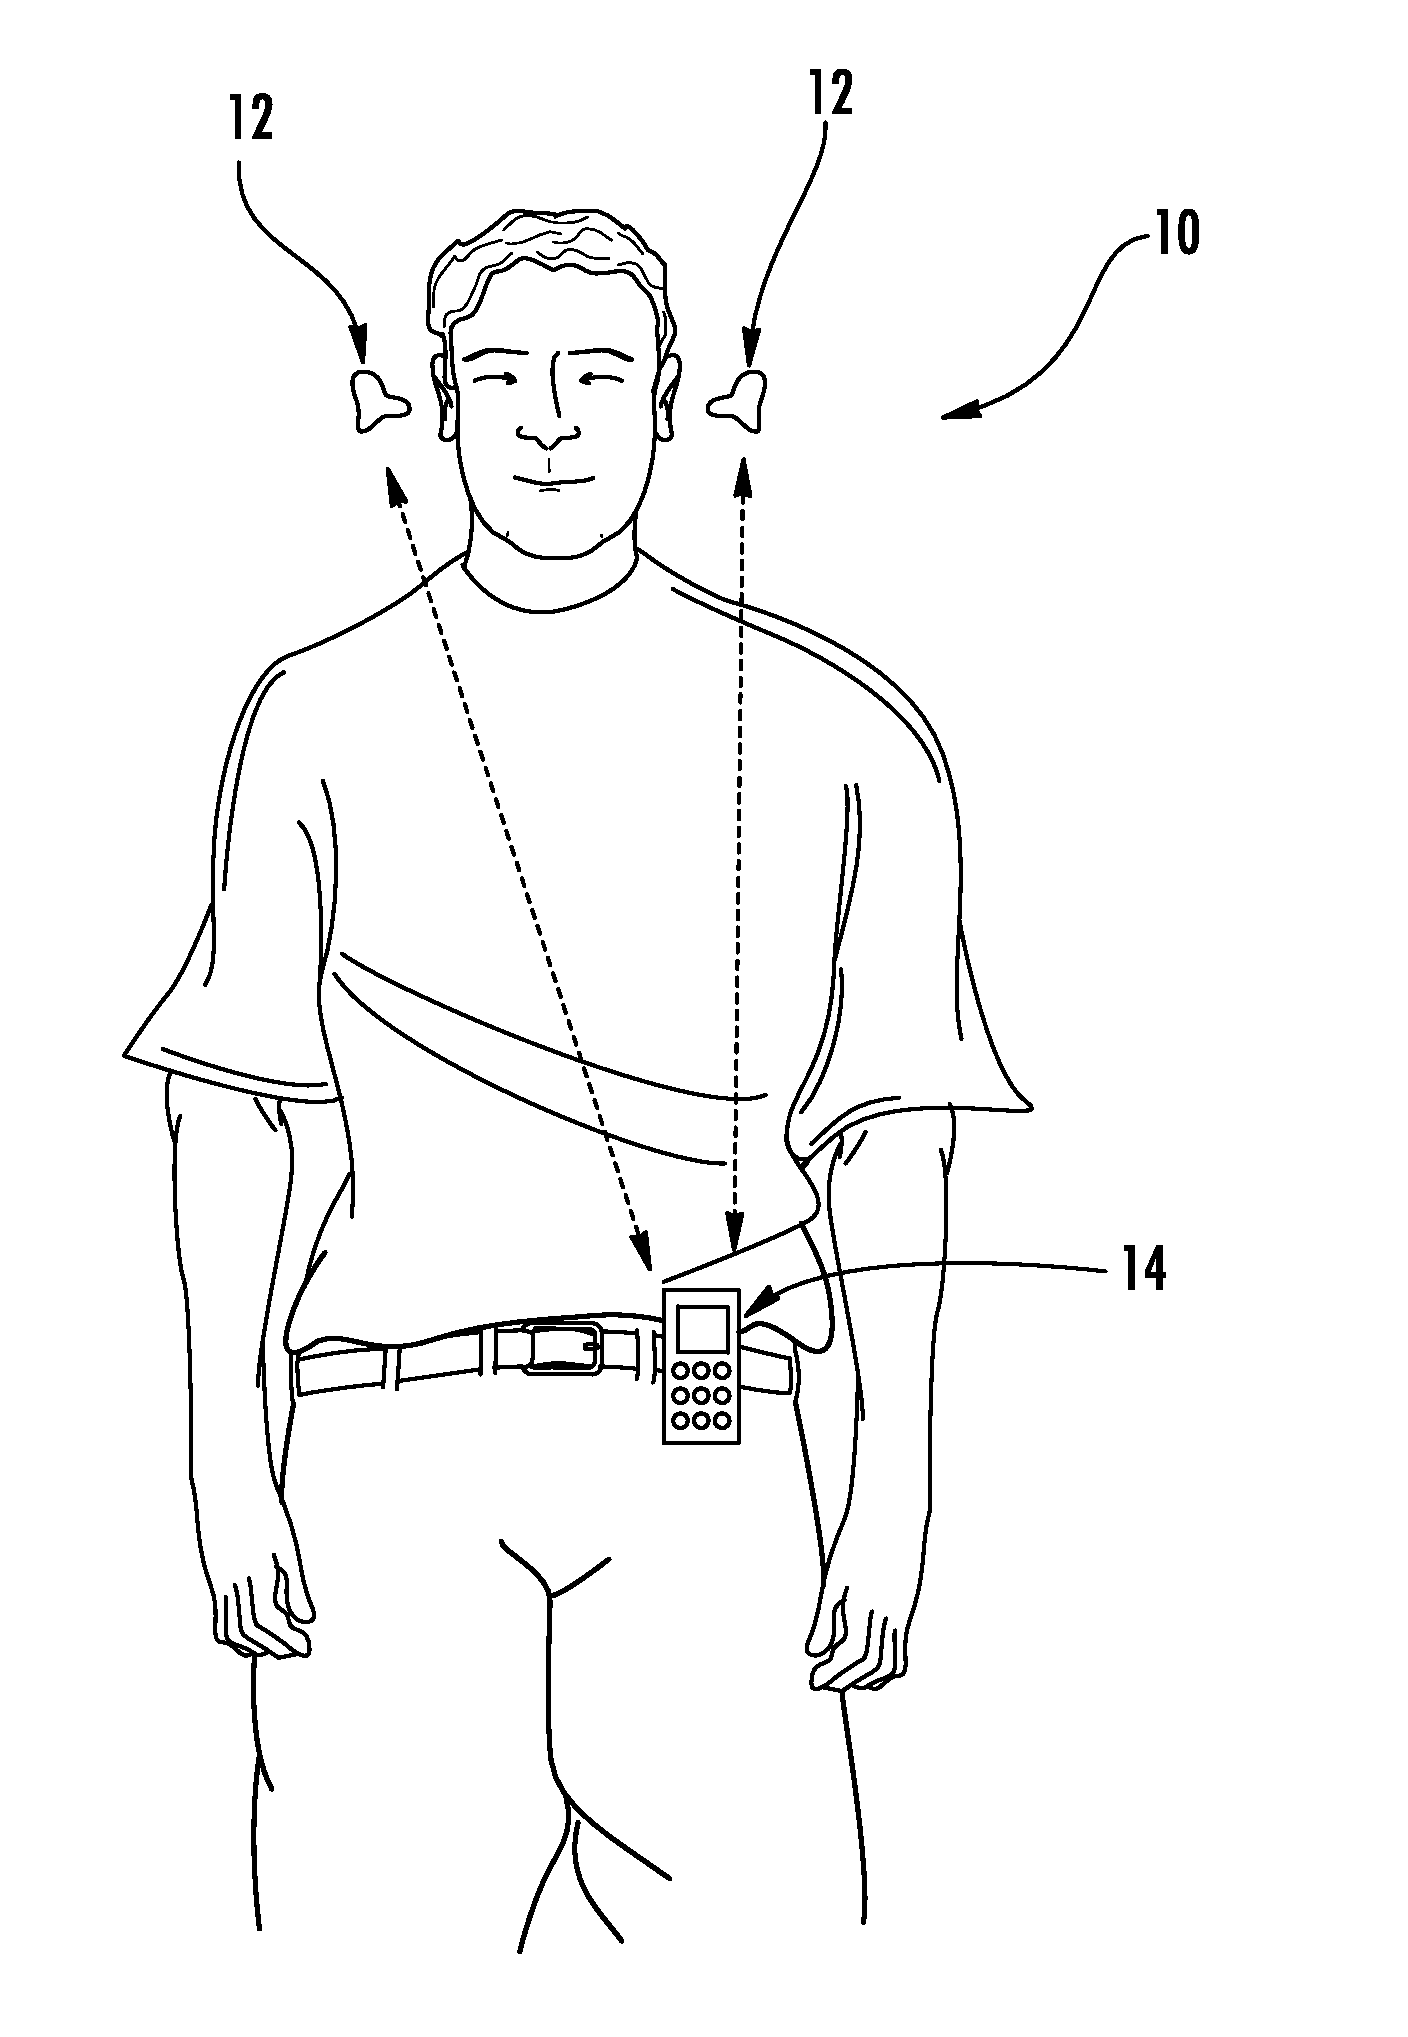 Method of enhancing sound for hearing impaired individuals